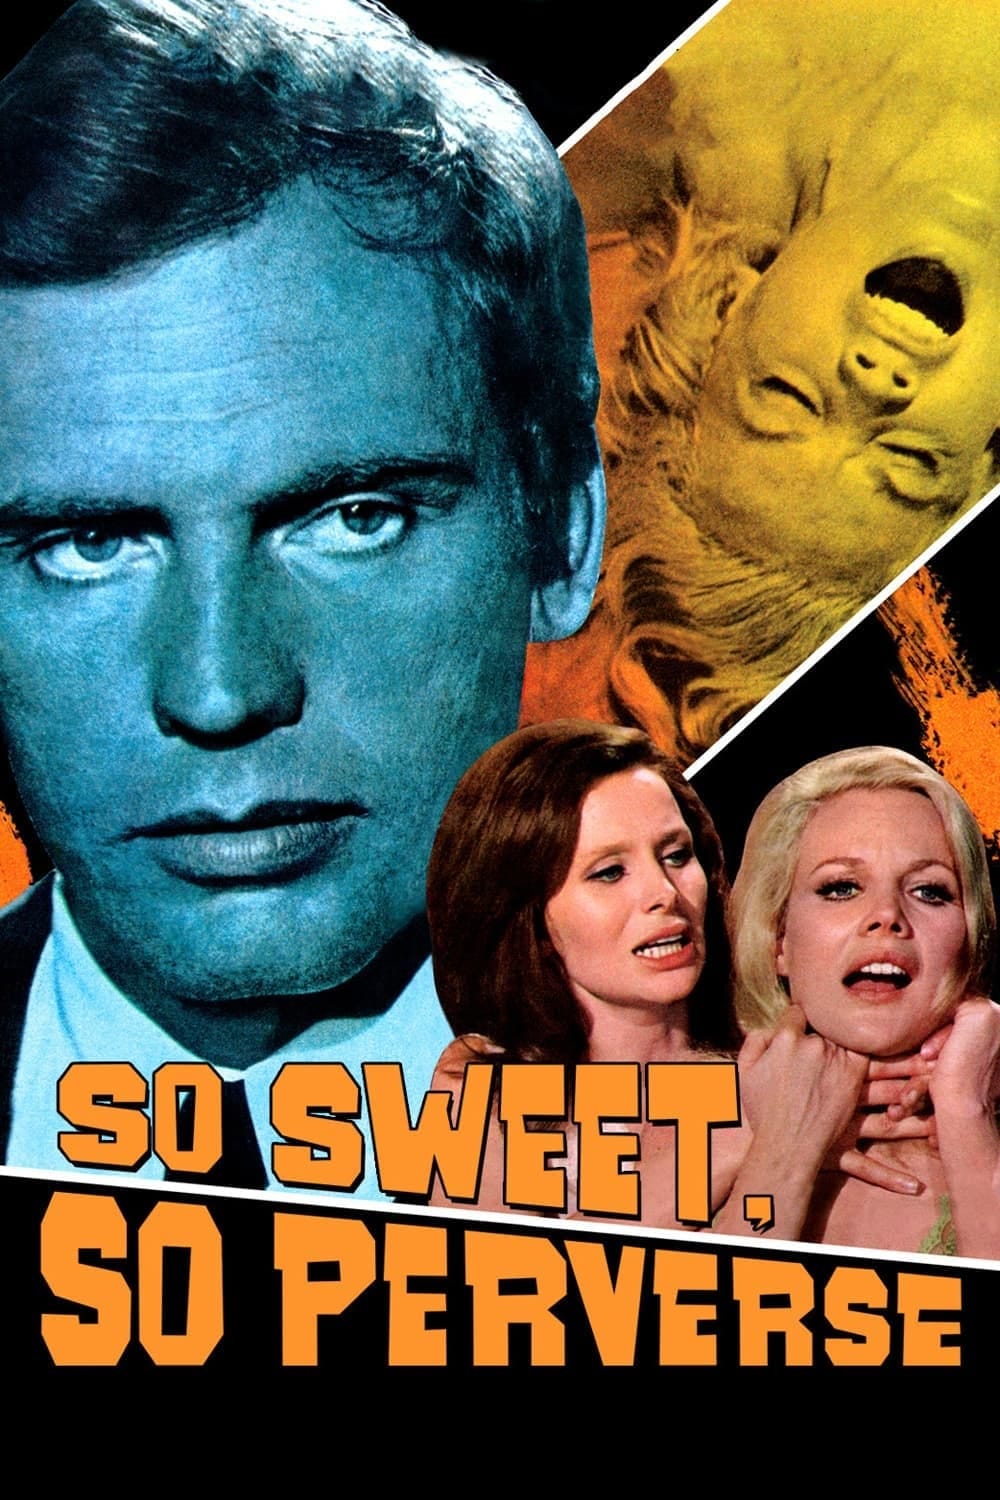 So Sweet... So Perverse (1969) | Poster